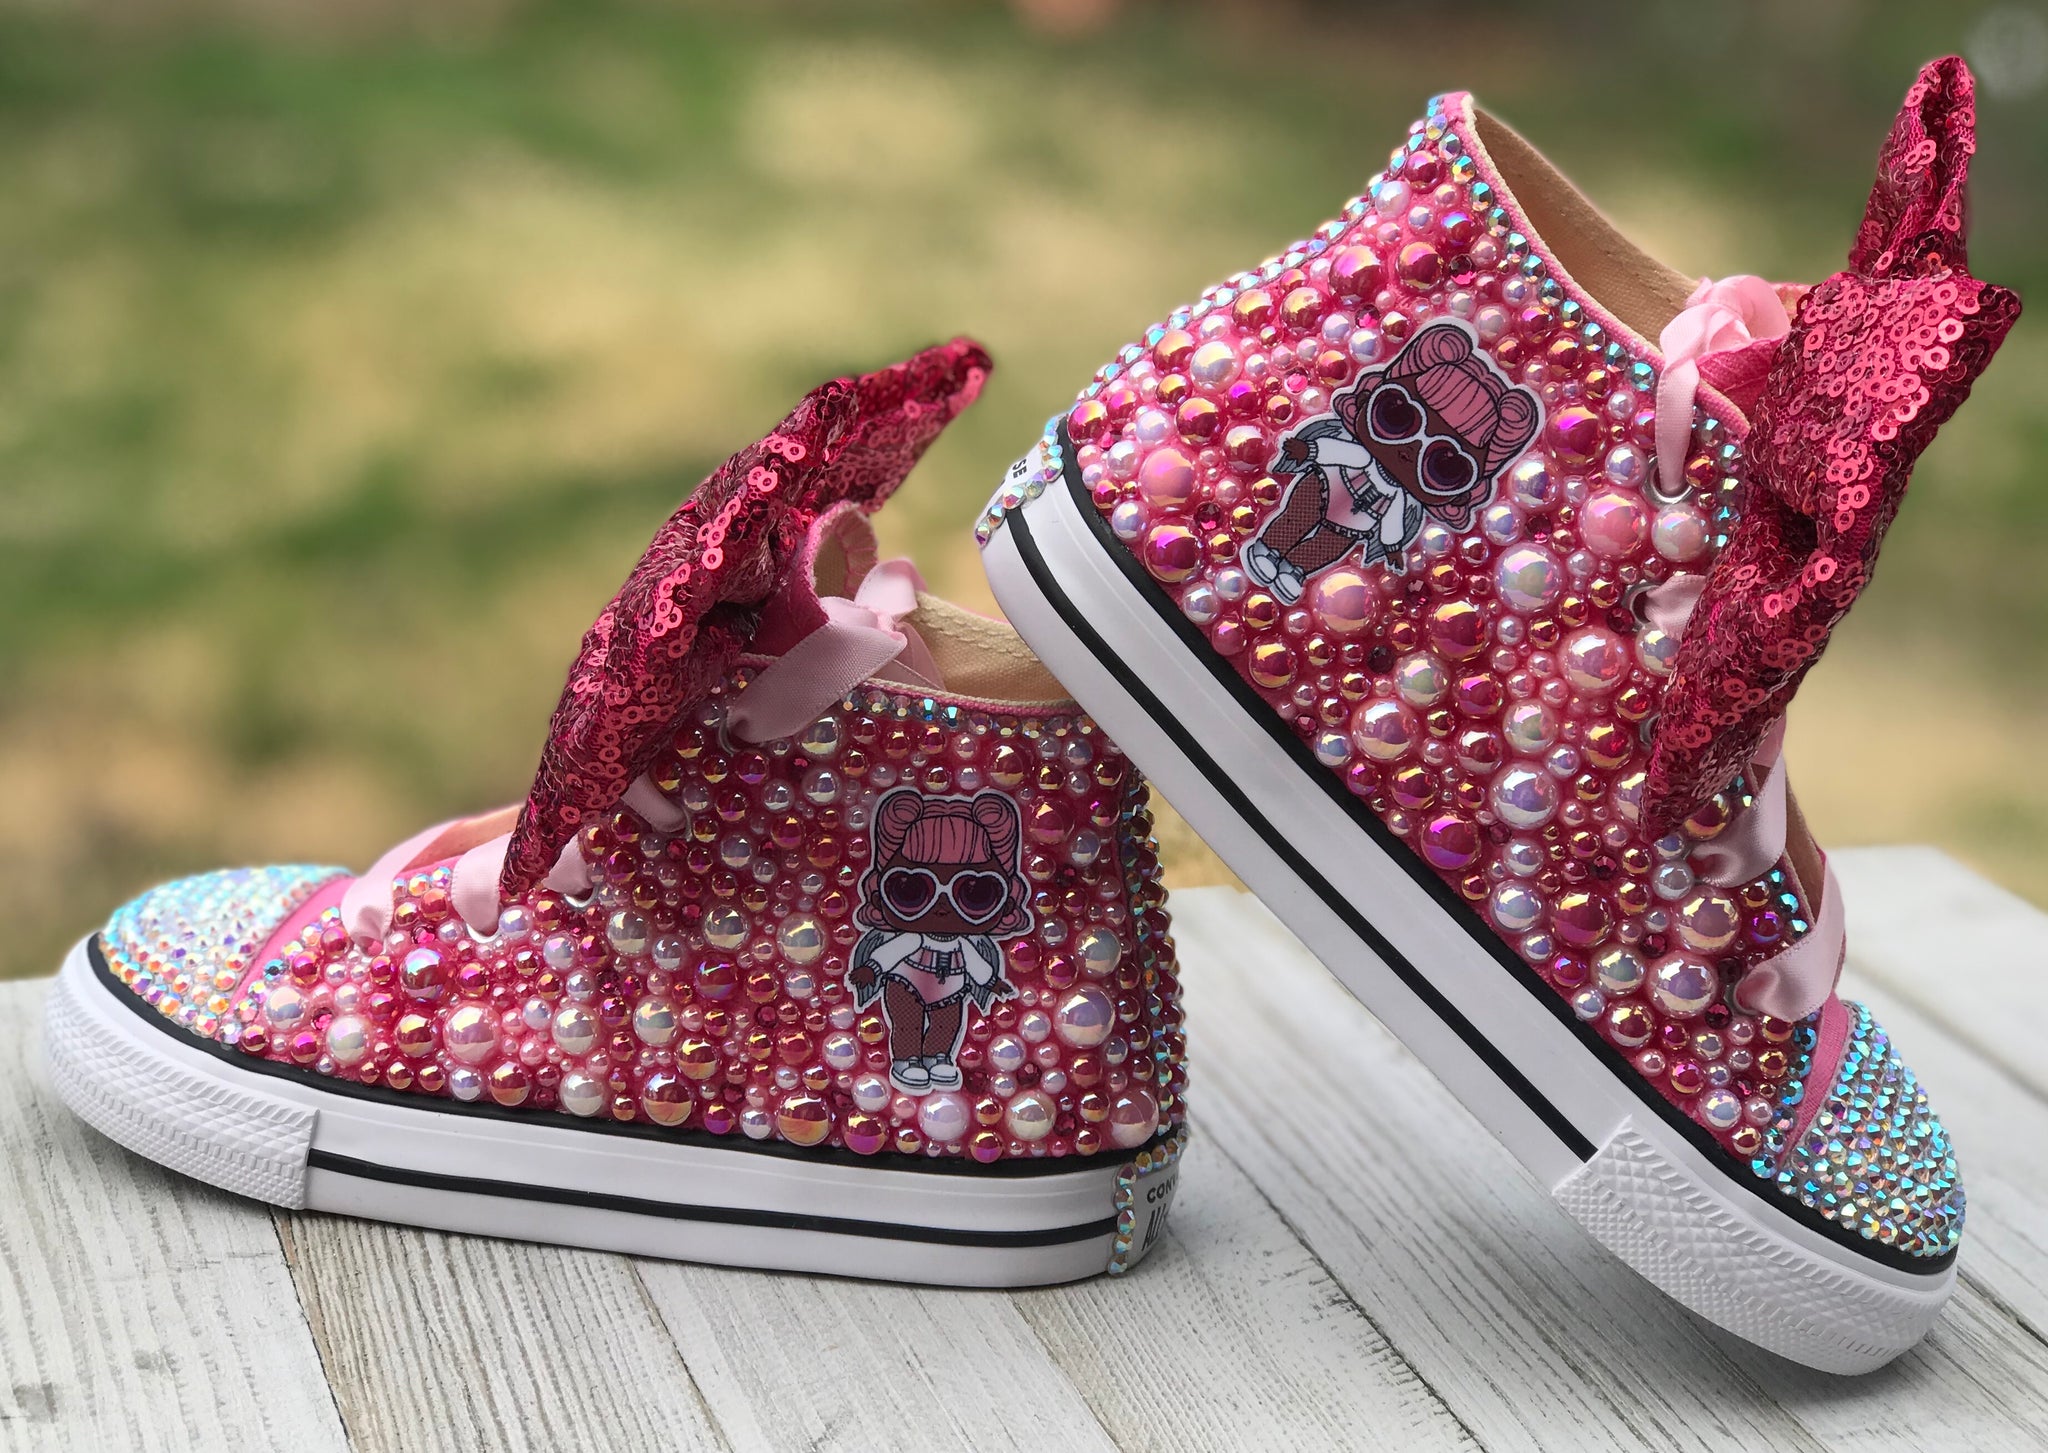 Pink Touch of Bling Converse Sneakers, Little Kids Shoe Size 11-3